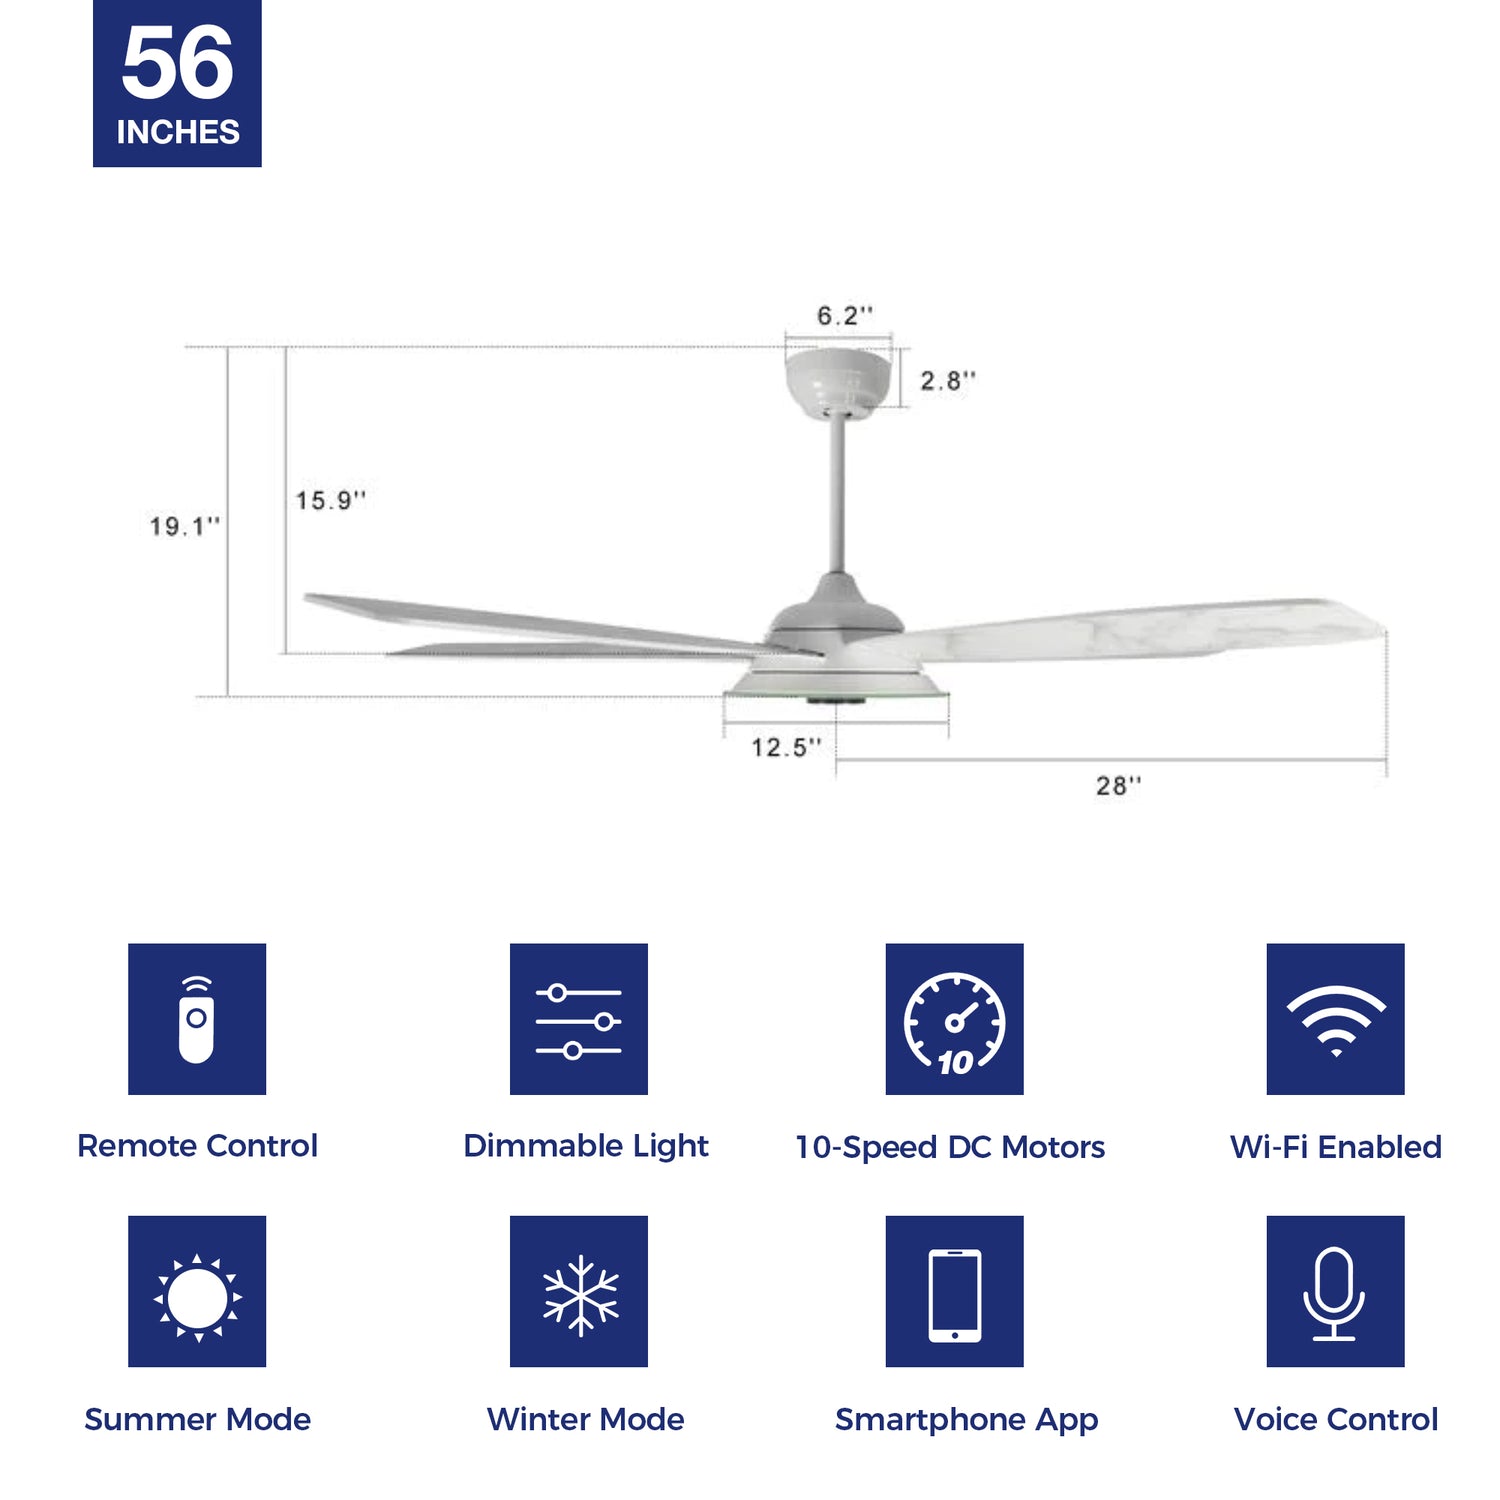 Striker Outdoor 56&quot; Smart Ceiling Fan with LED Light Kit-White Case and White Marble Pattern Fan Blades. The fan features Remote control, Wi-Fi apps, and Voice control technology (compatible with Amazon Alexa and Google Home Assistant ) to set fan preferences. Equipped with 3576-lumen dimmable LED lights and a 10-speed DC Motor (5600CFM airflow output), it brings you cool and bright. 